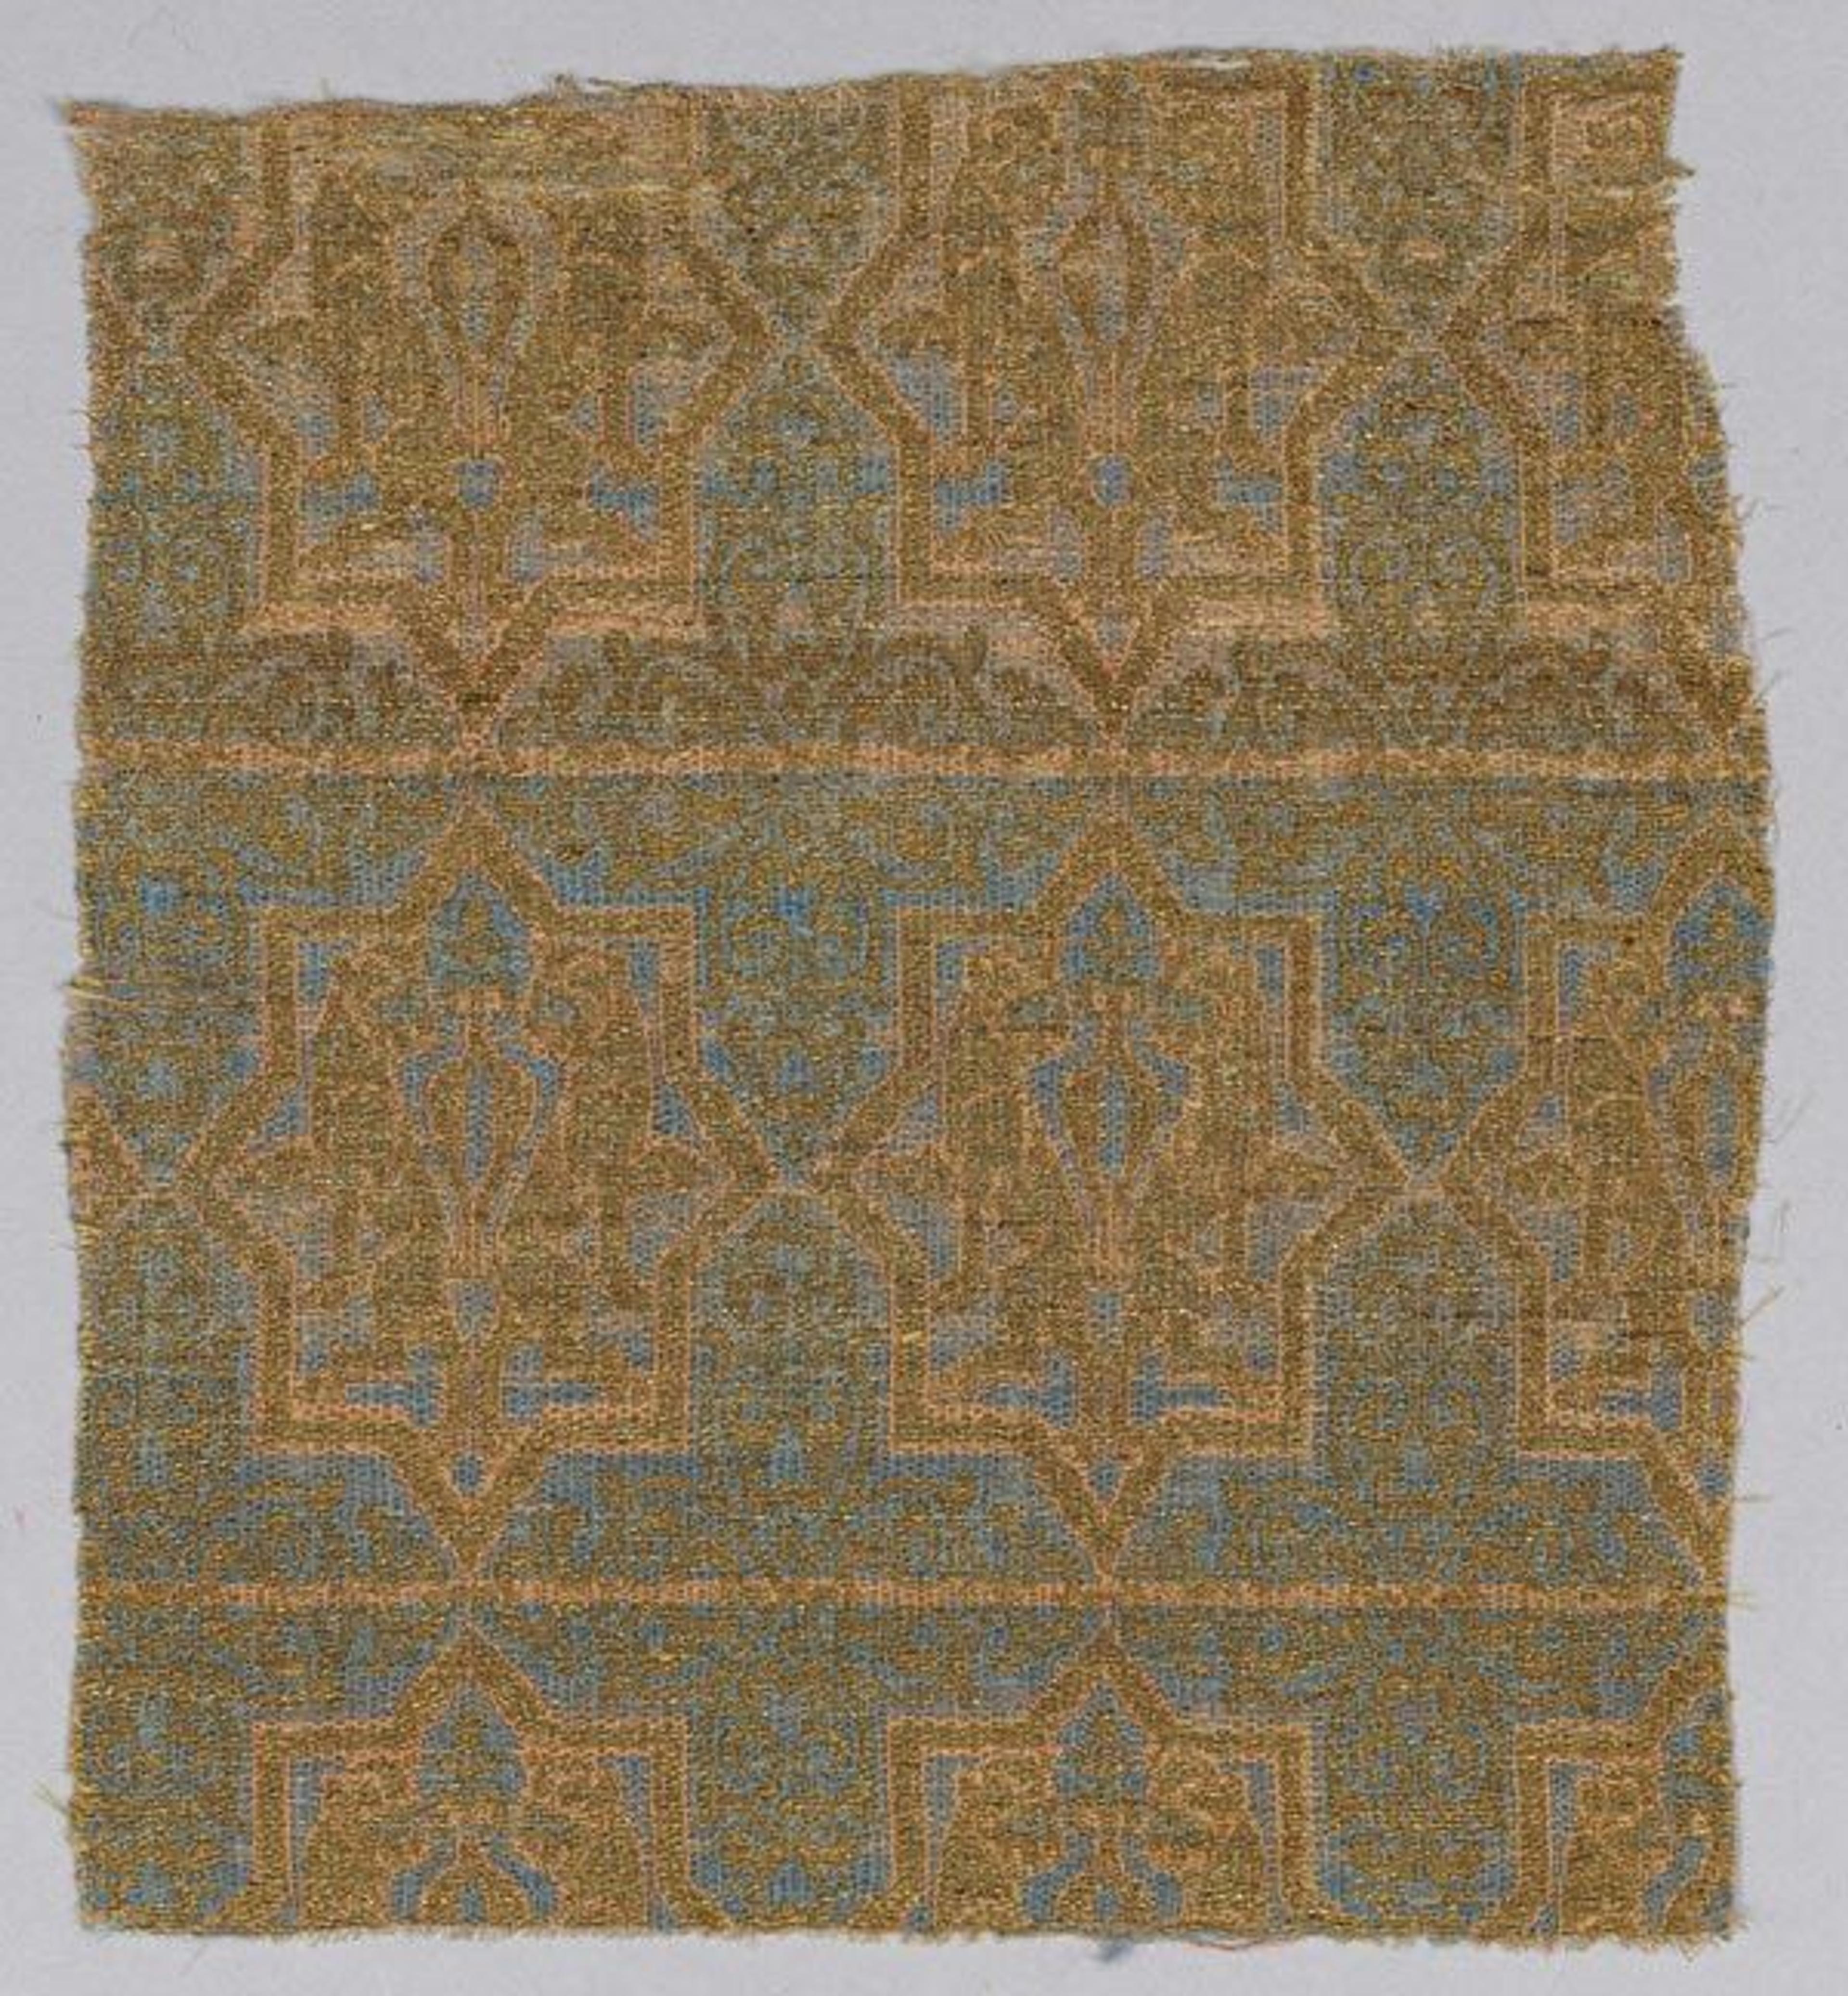 Textile fragment from the chasuble of San Valerius, 13th century | 46.156.3